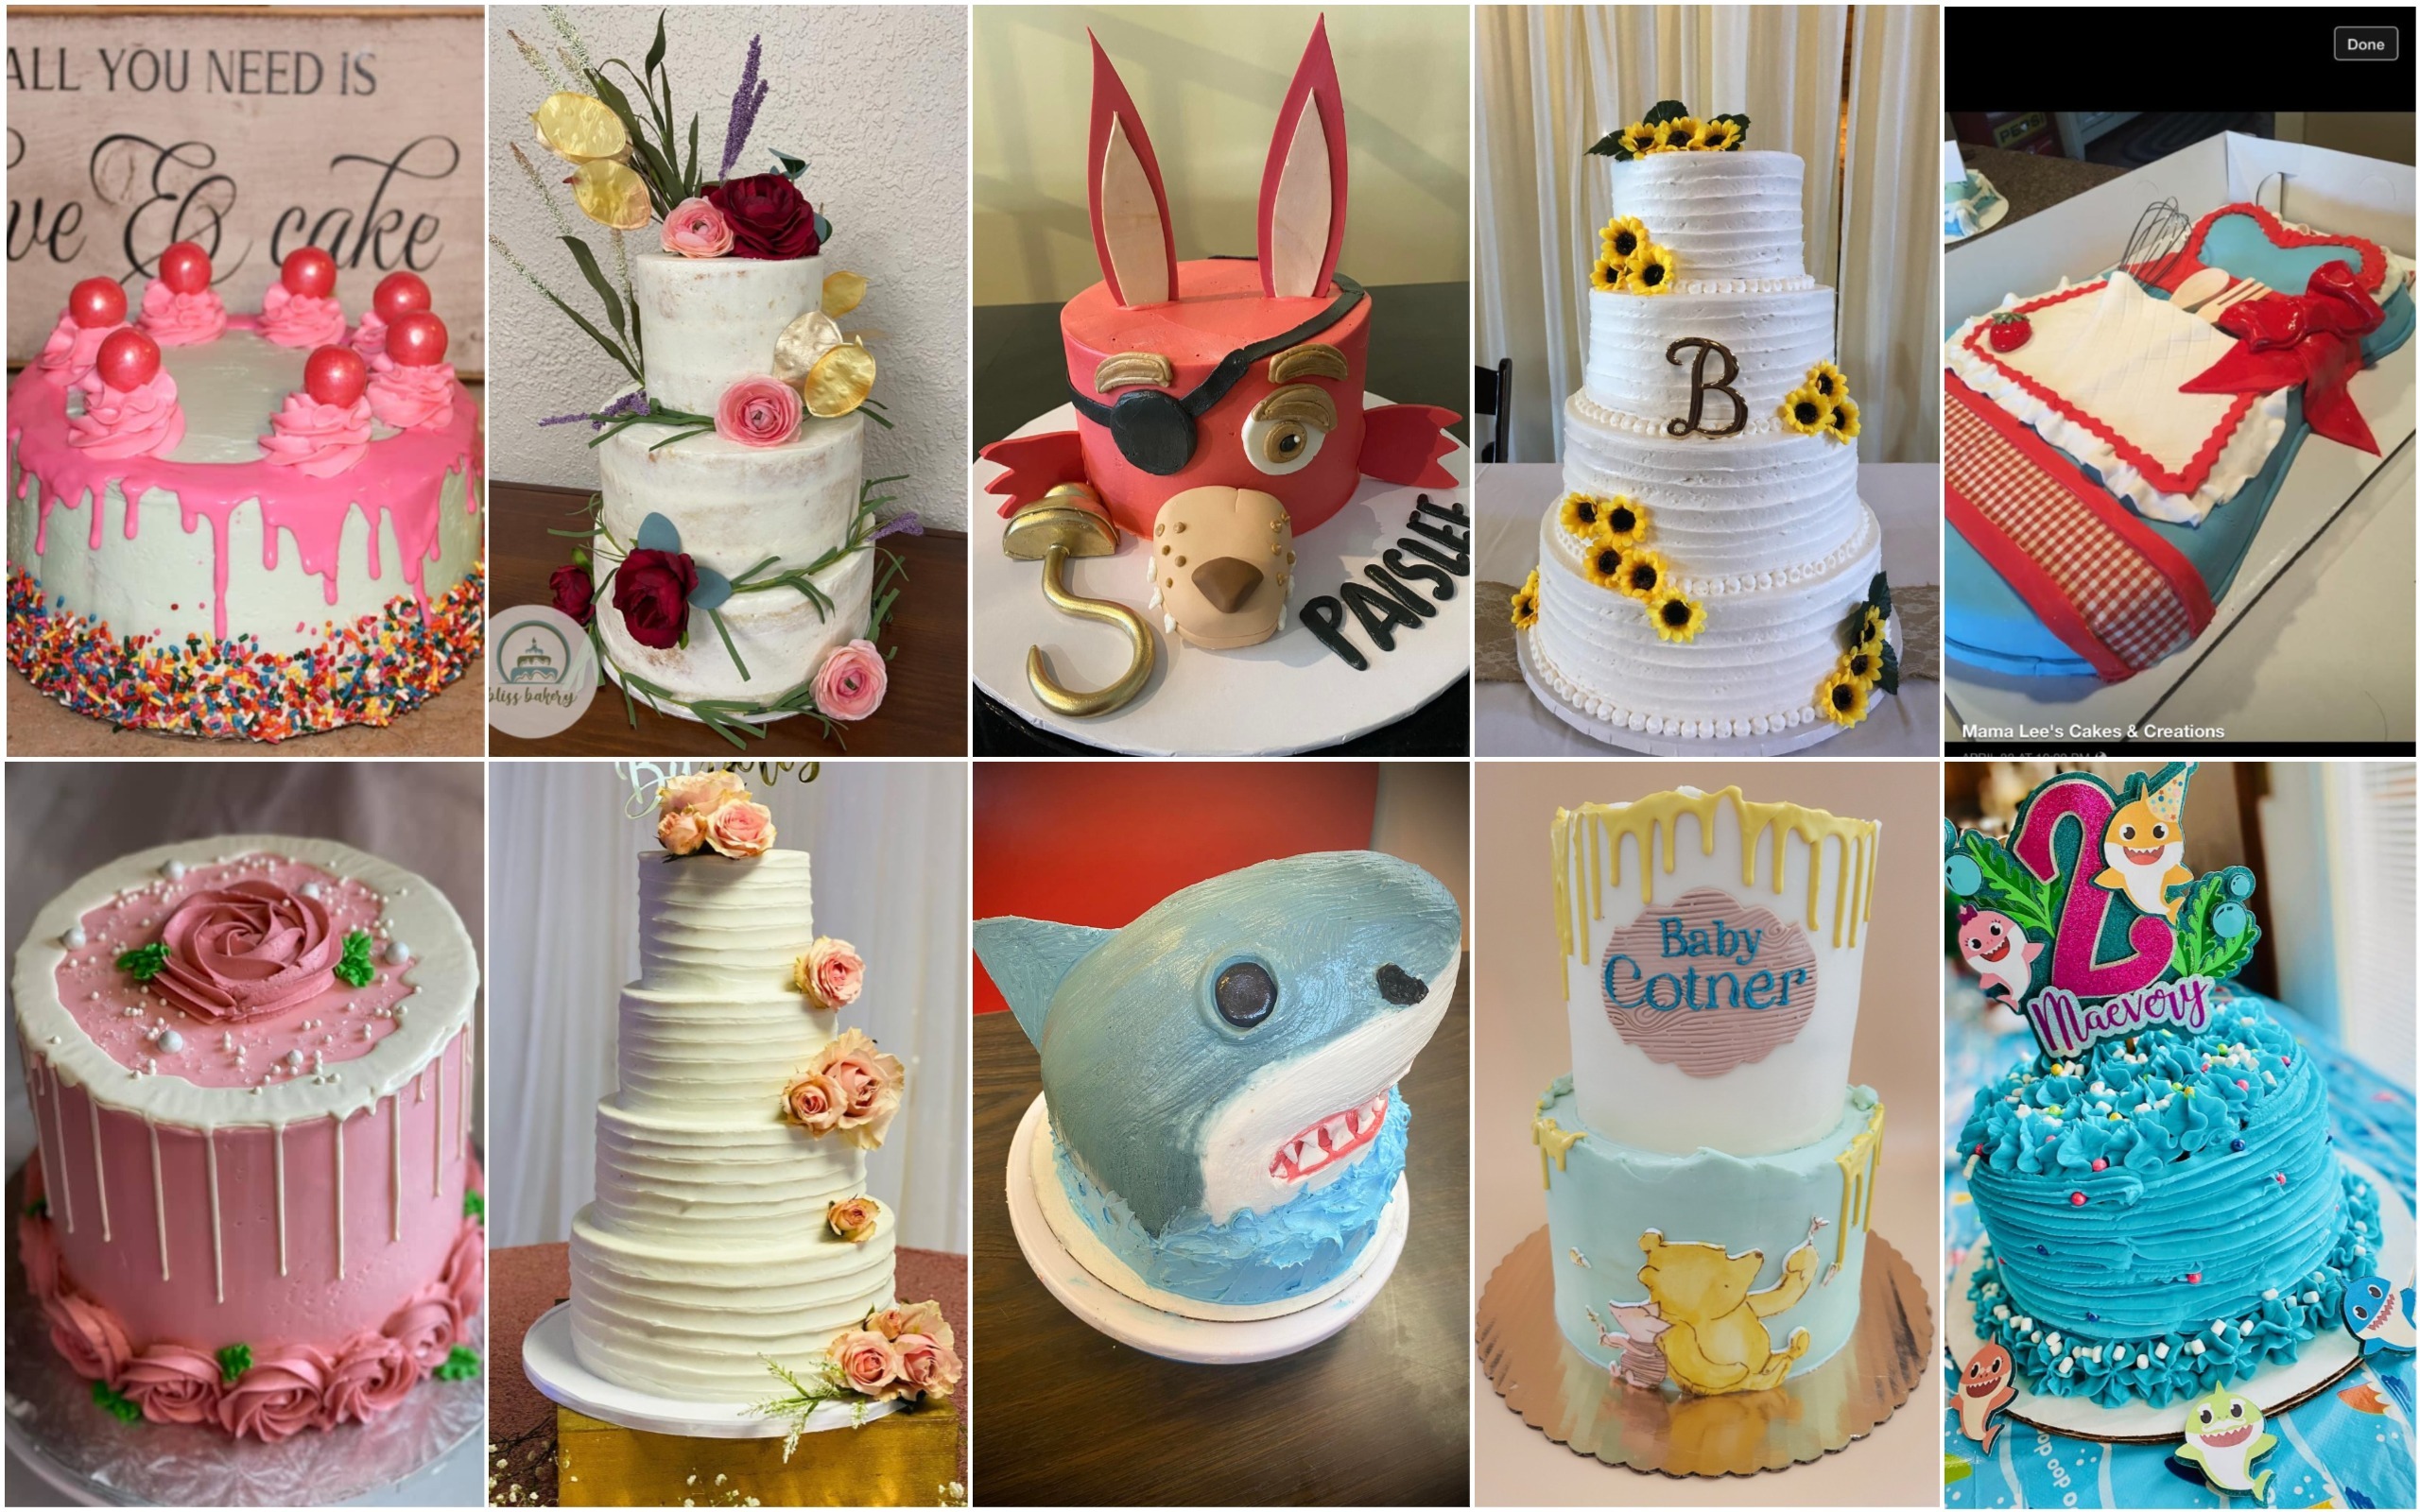 Creative Cake Design | Decorate Your Cake Like the Pros!